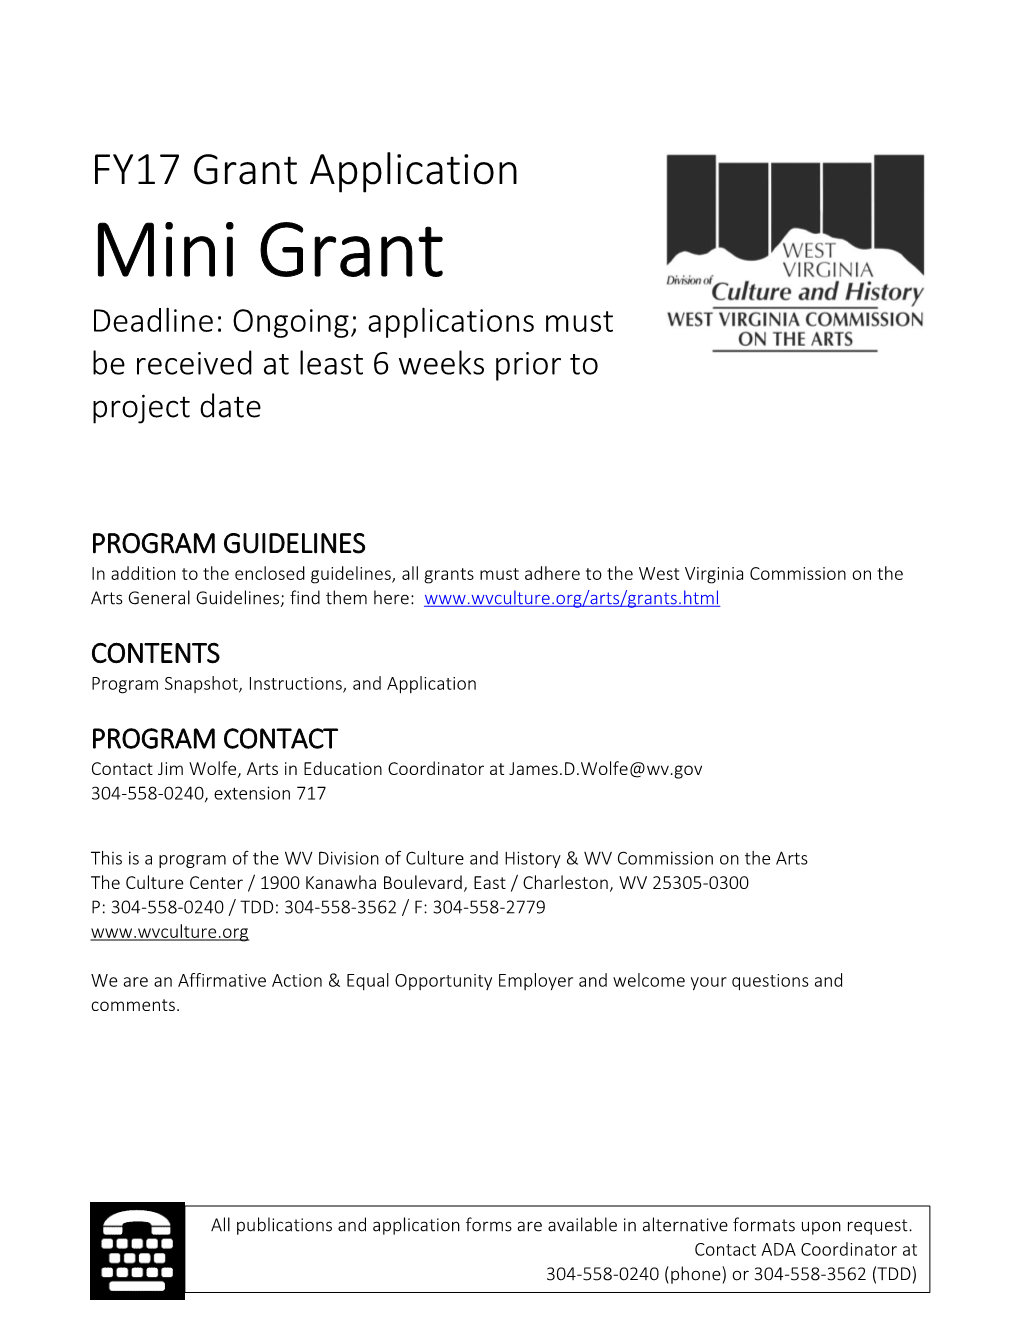 Deadline: Ongoing; Applications Must Be Received at Least 6Weeks Prior to Project Date